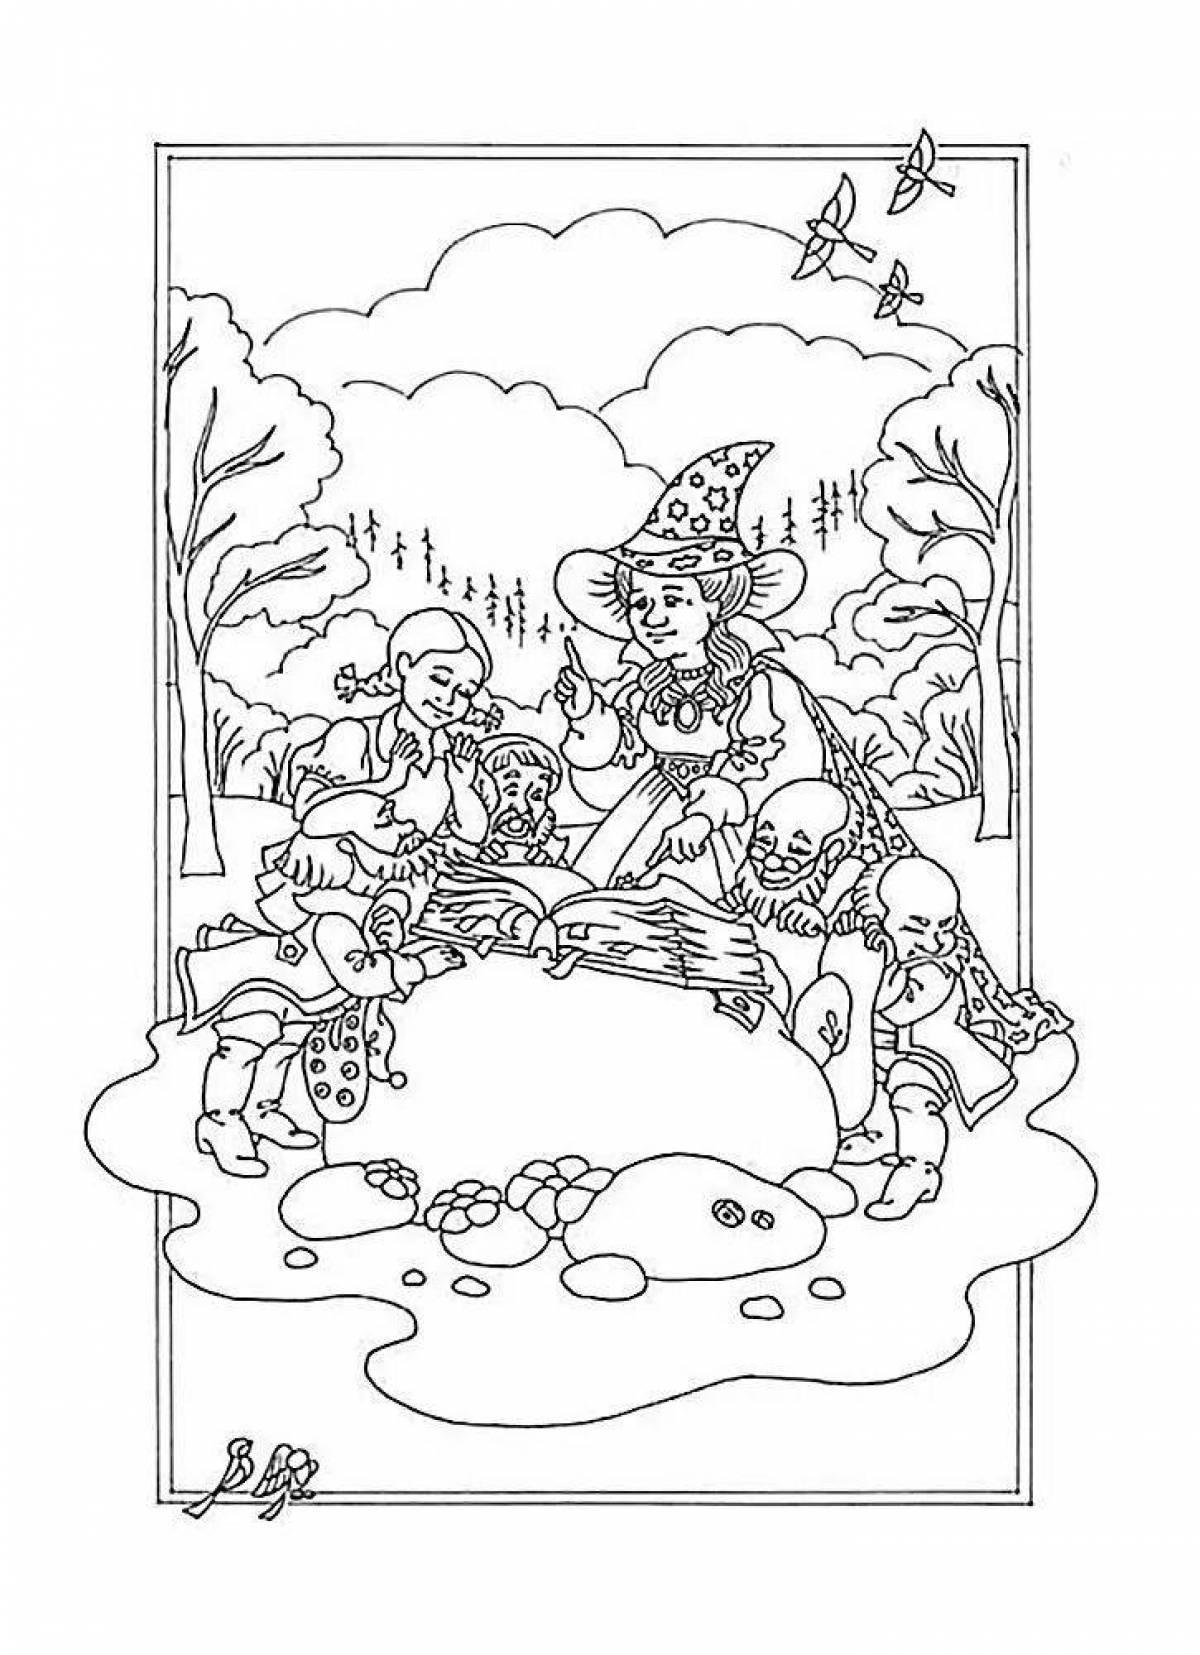 Majestic emerald city coloring page